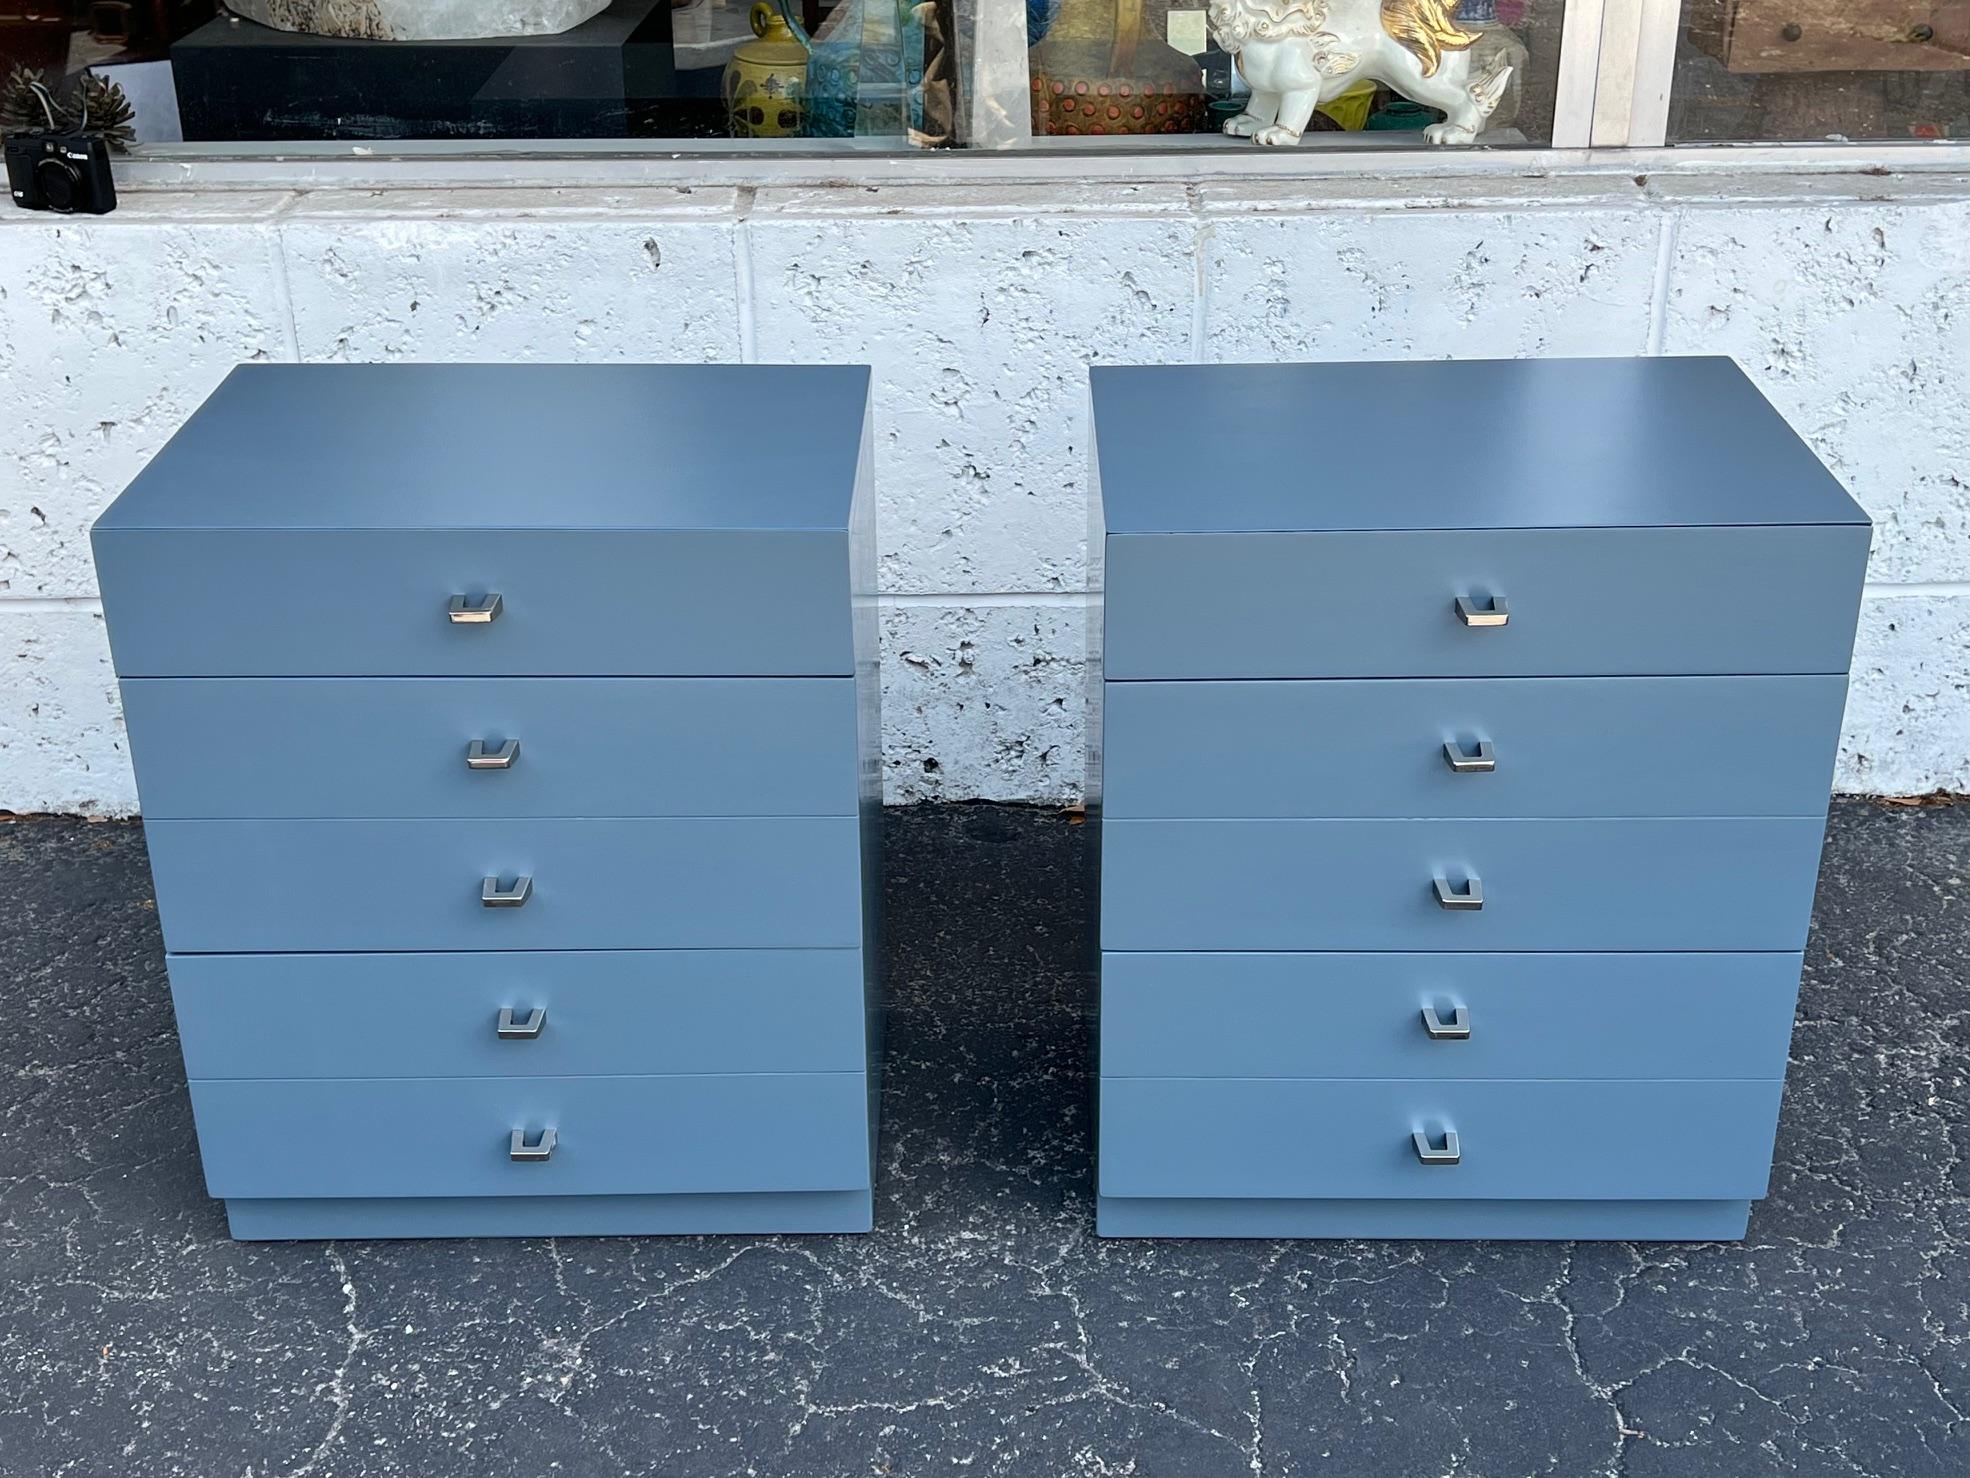 A fine pair of night stands or small chests of drawers by American of Martinsville. Ca' 1960's, with three drawers each. Reconditioned and redone in blue gray lacquer, handles polished/lacquered.